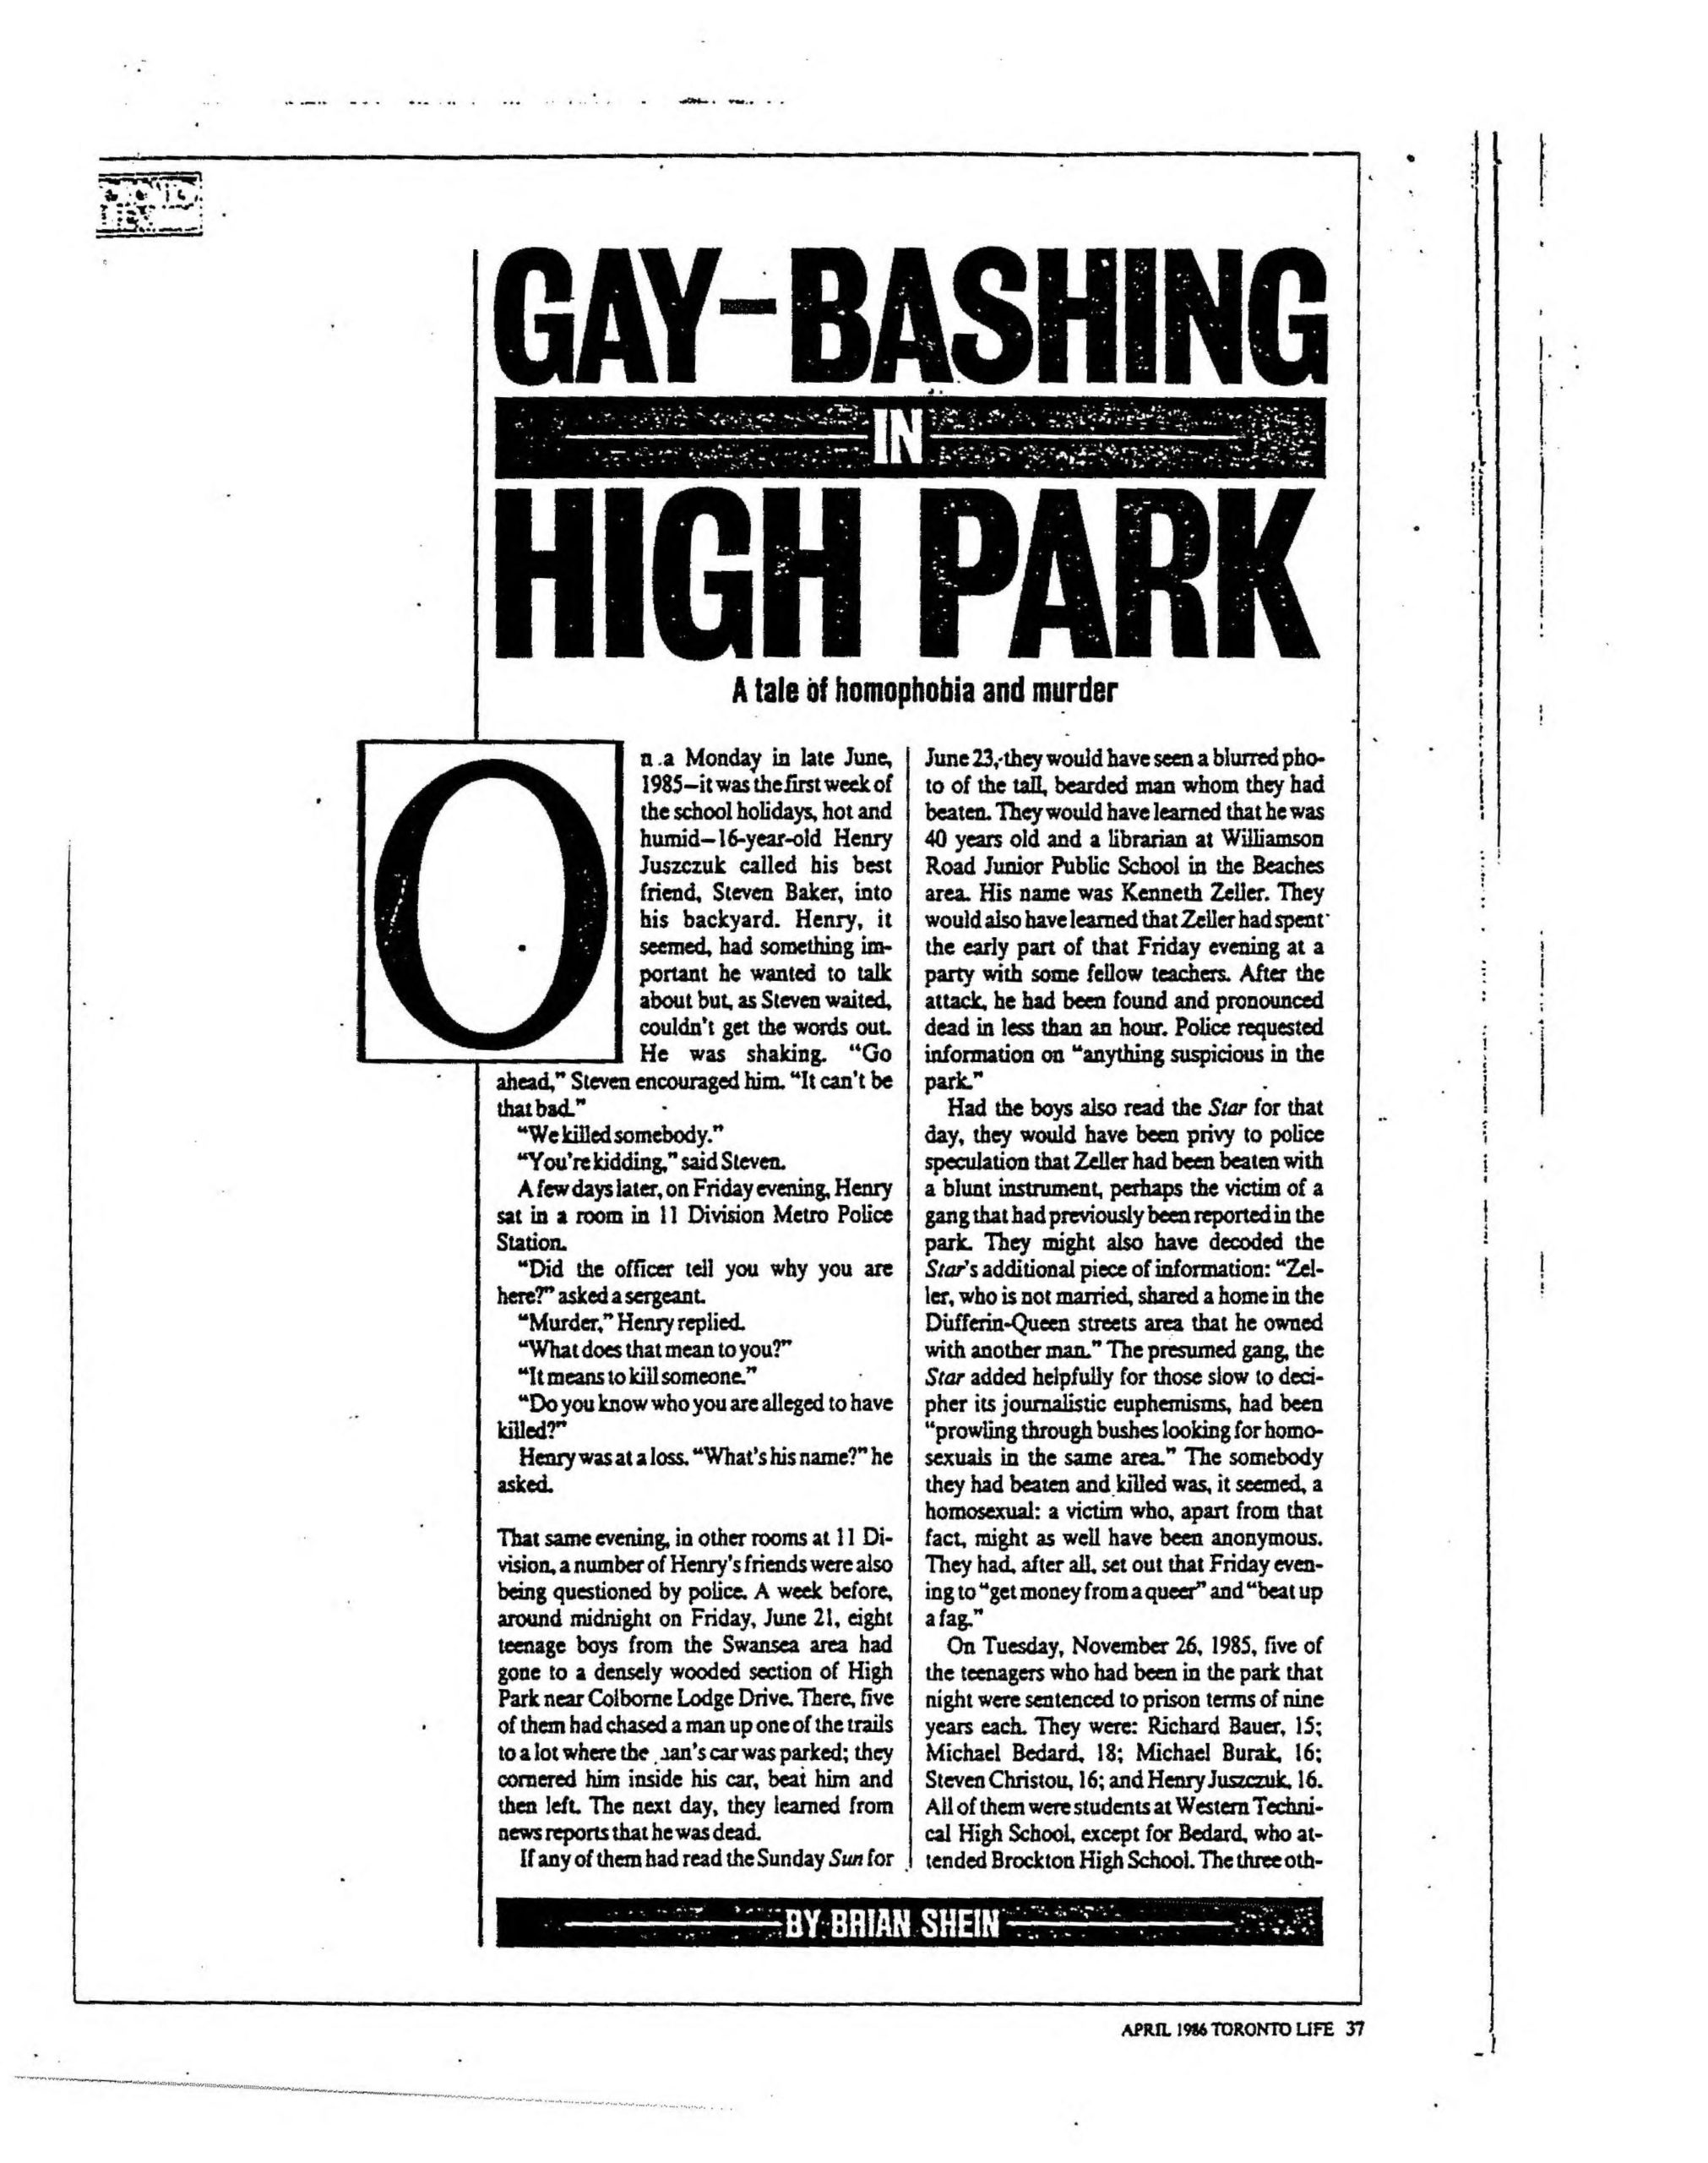 Newspaper article titled "Gay Bashing in High Park."